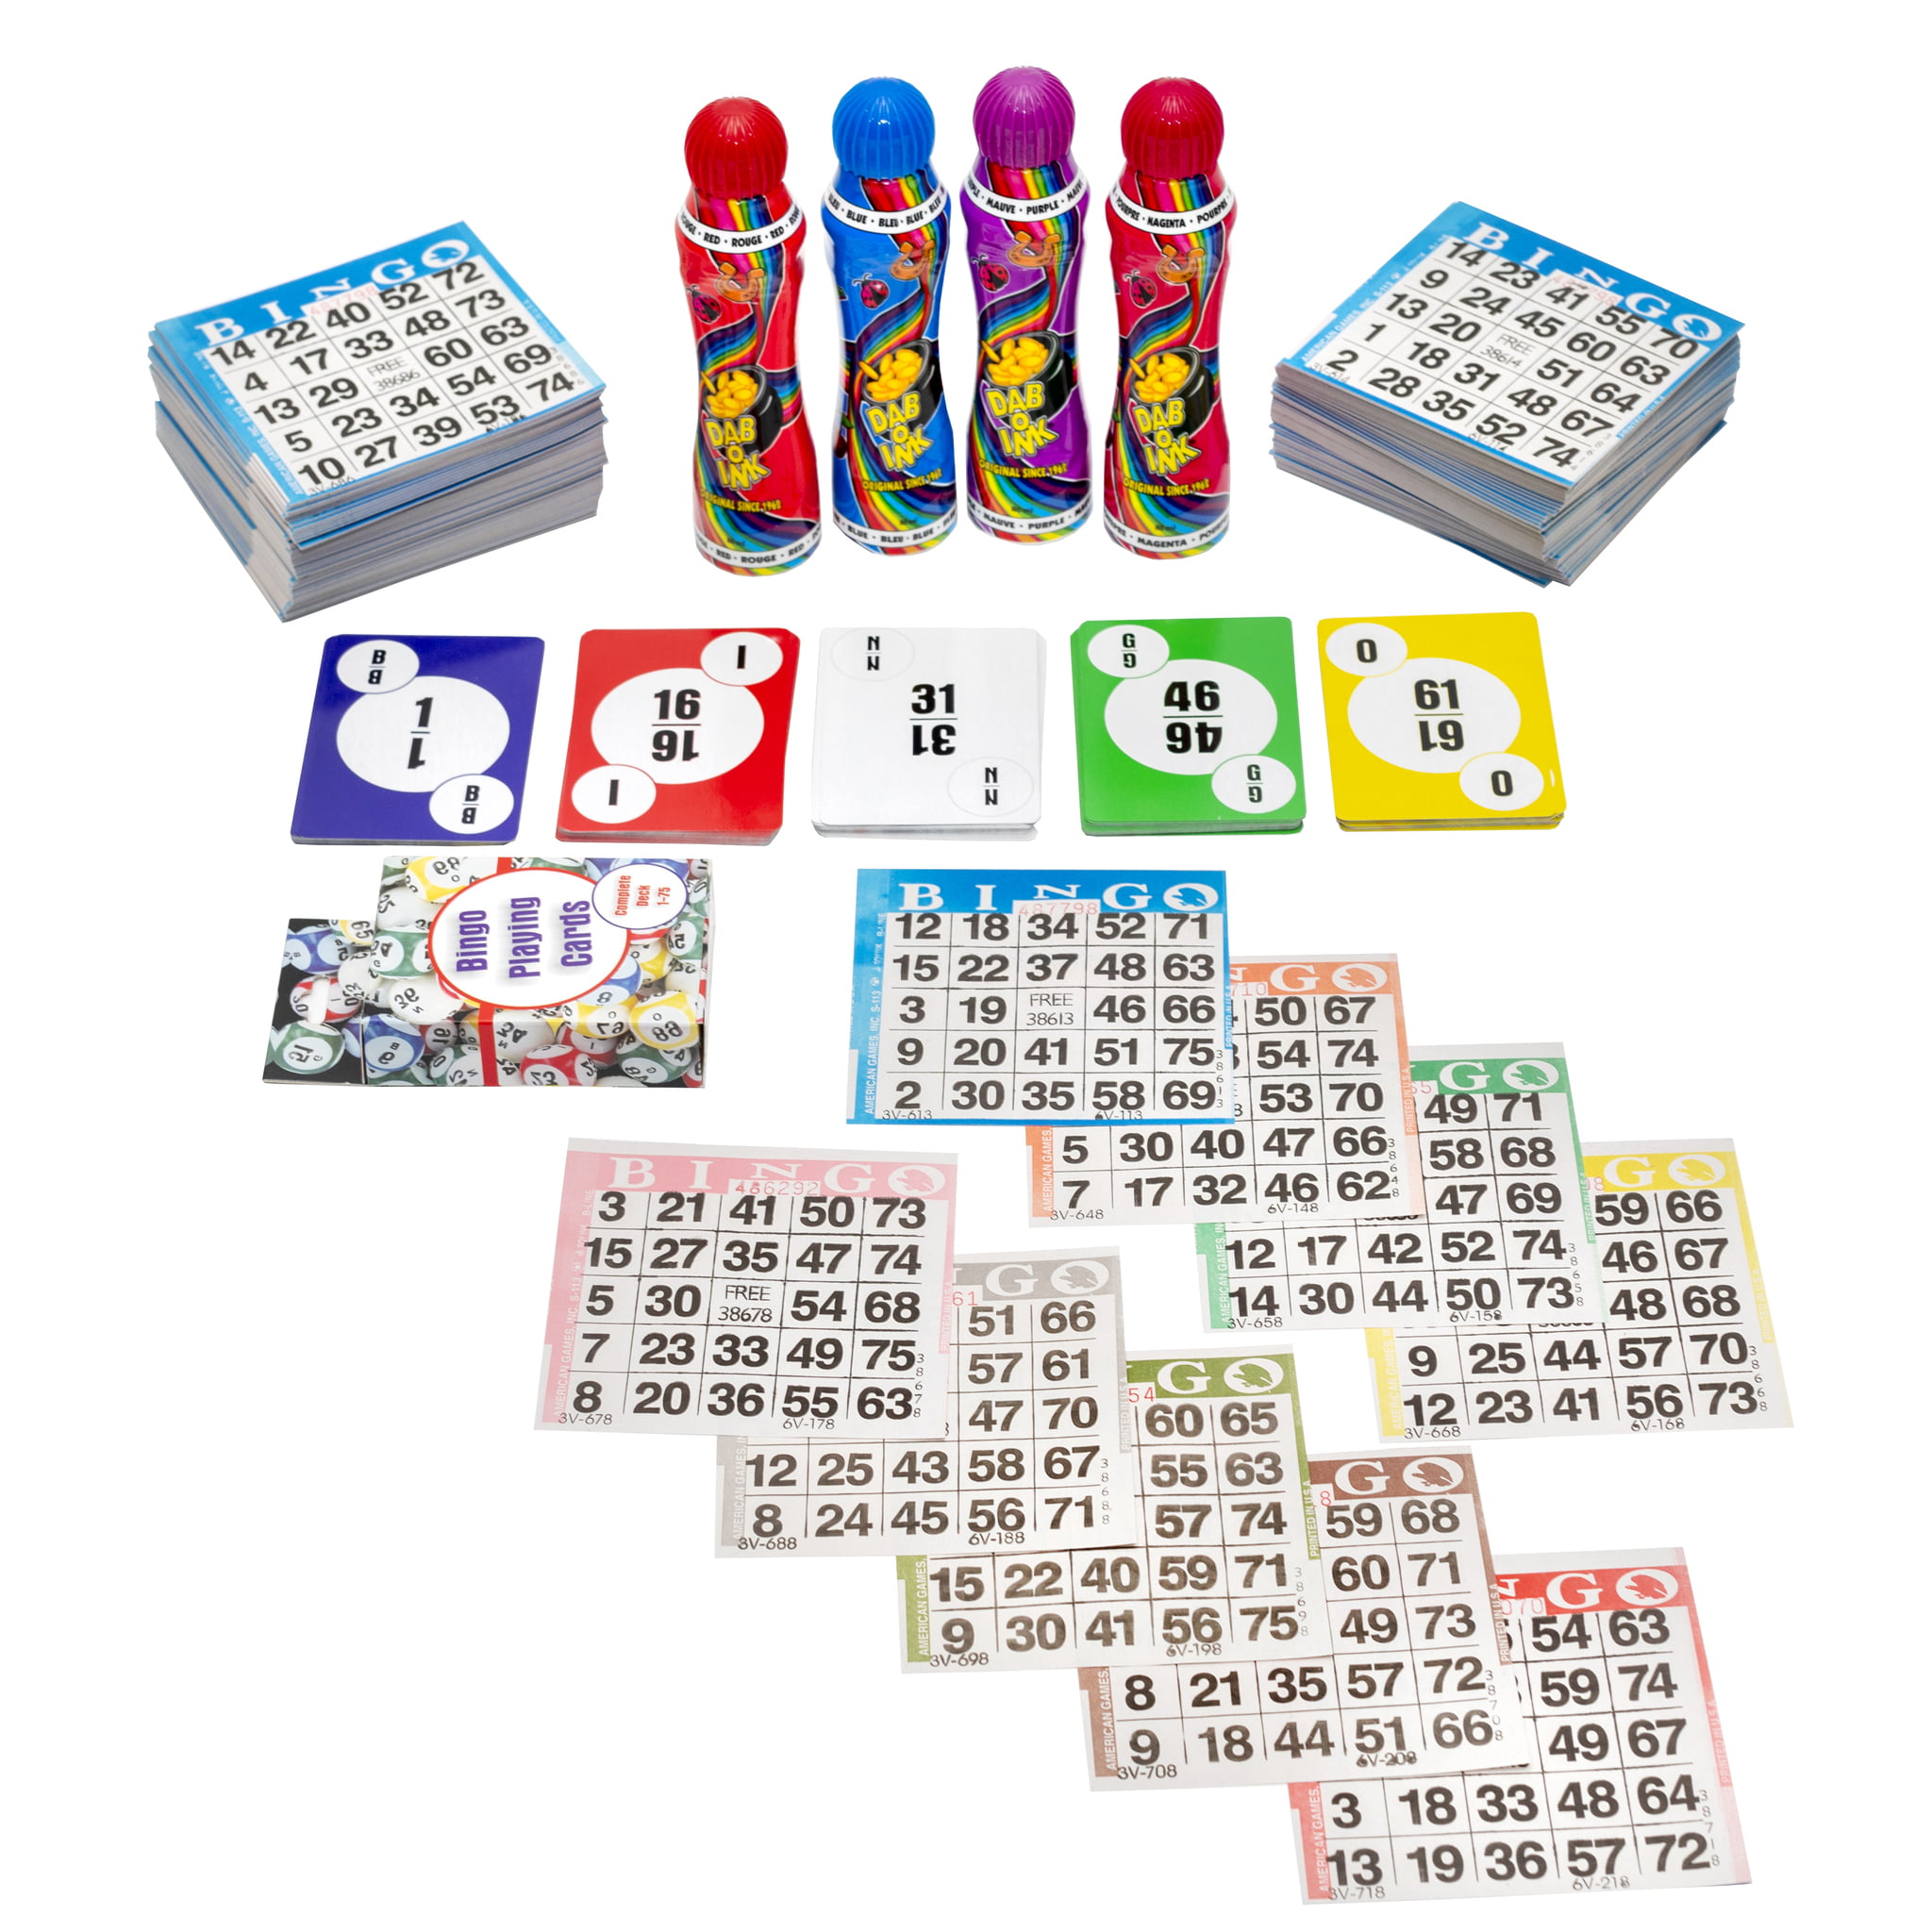 100 Pack Reusable Multicolor Bingo Cards Game Nights Parties 25 ea of 4 Colors 